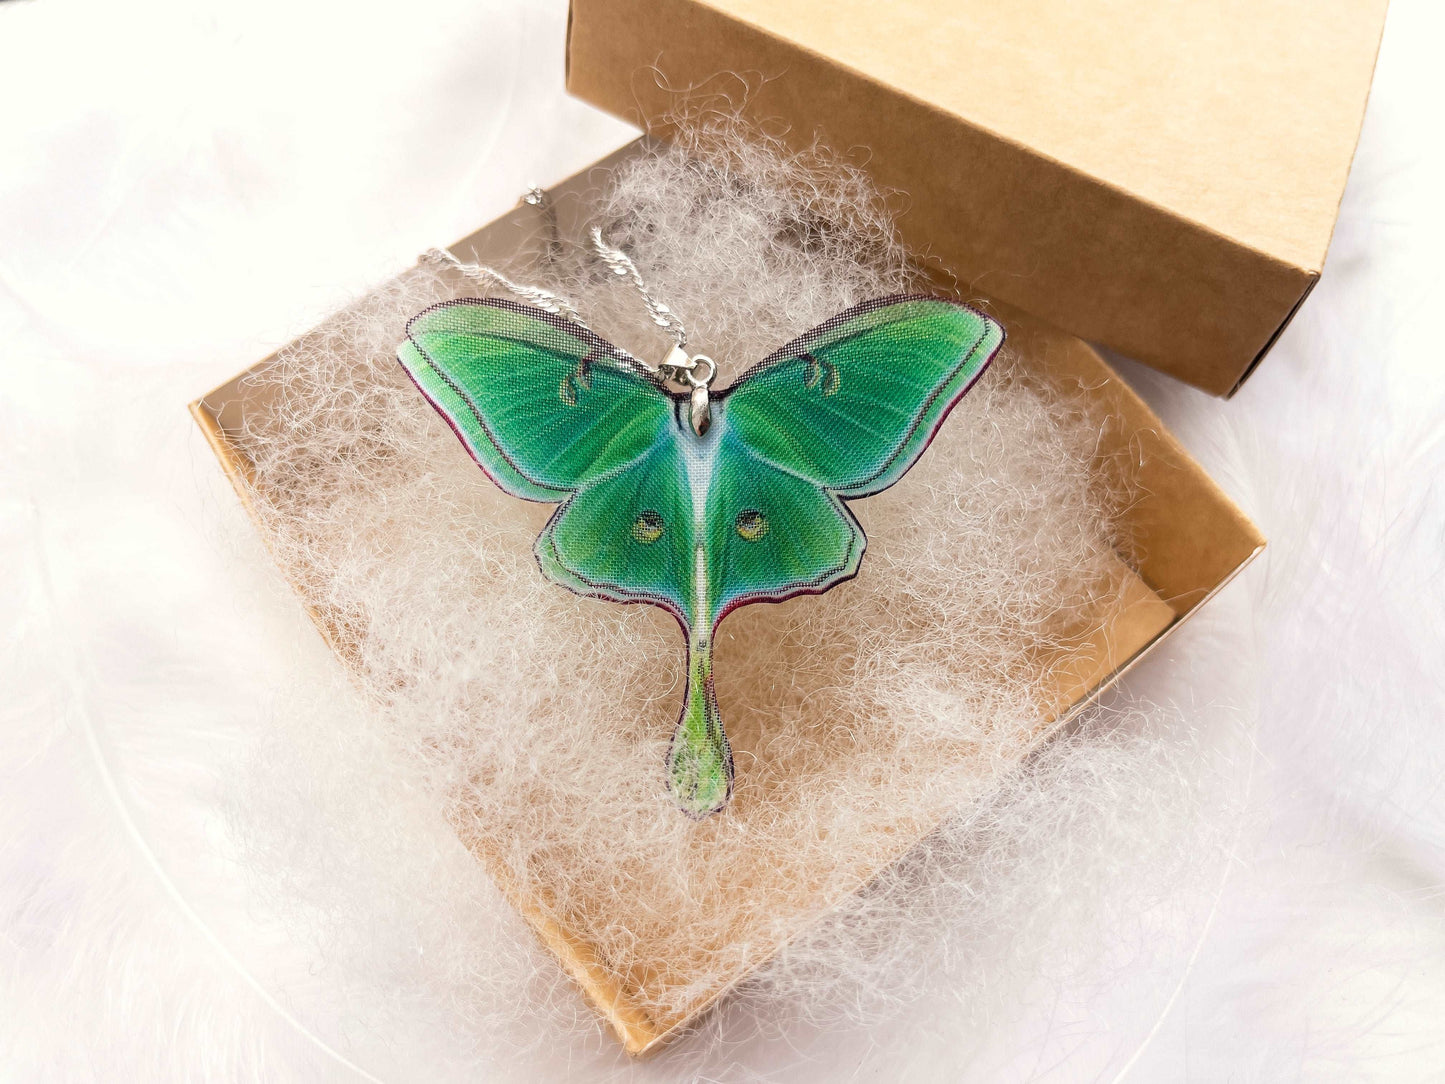 Side view of the Green Lunar Moth Pendant - Perfect for layering or wearing on its own